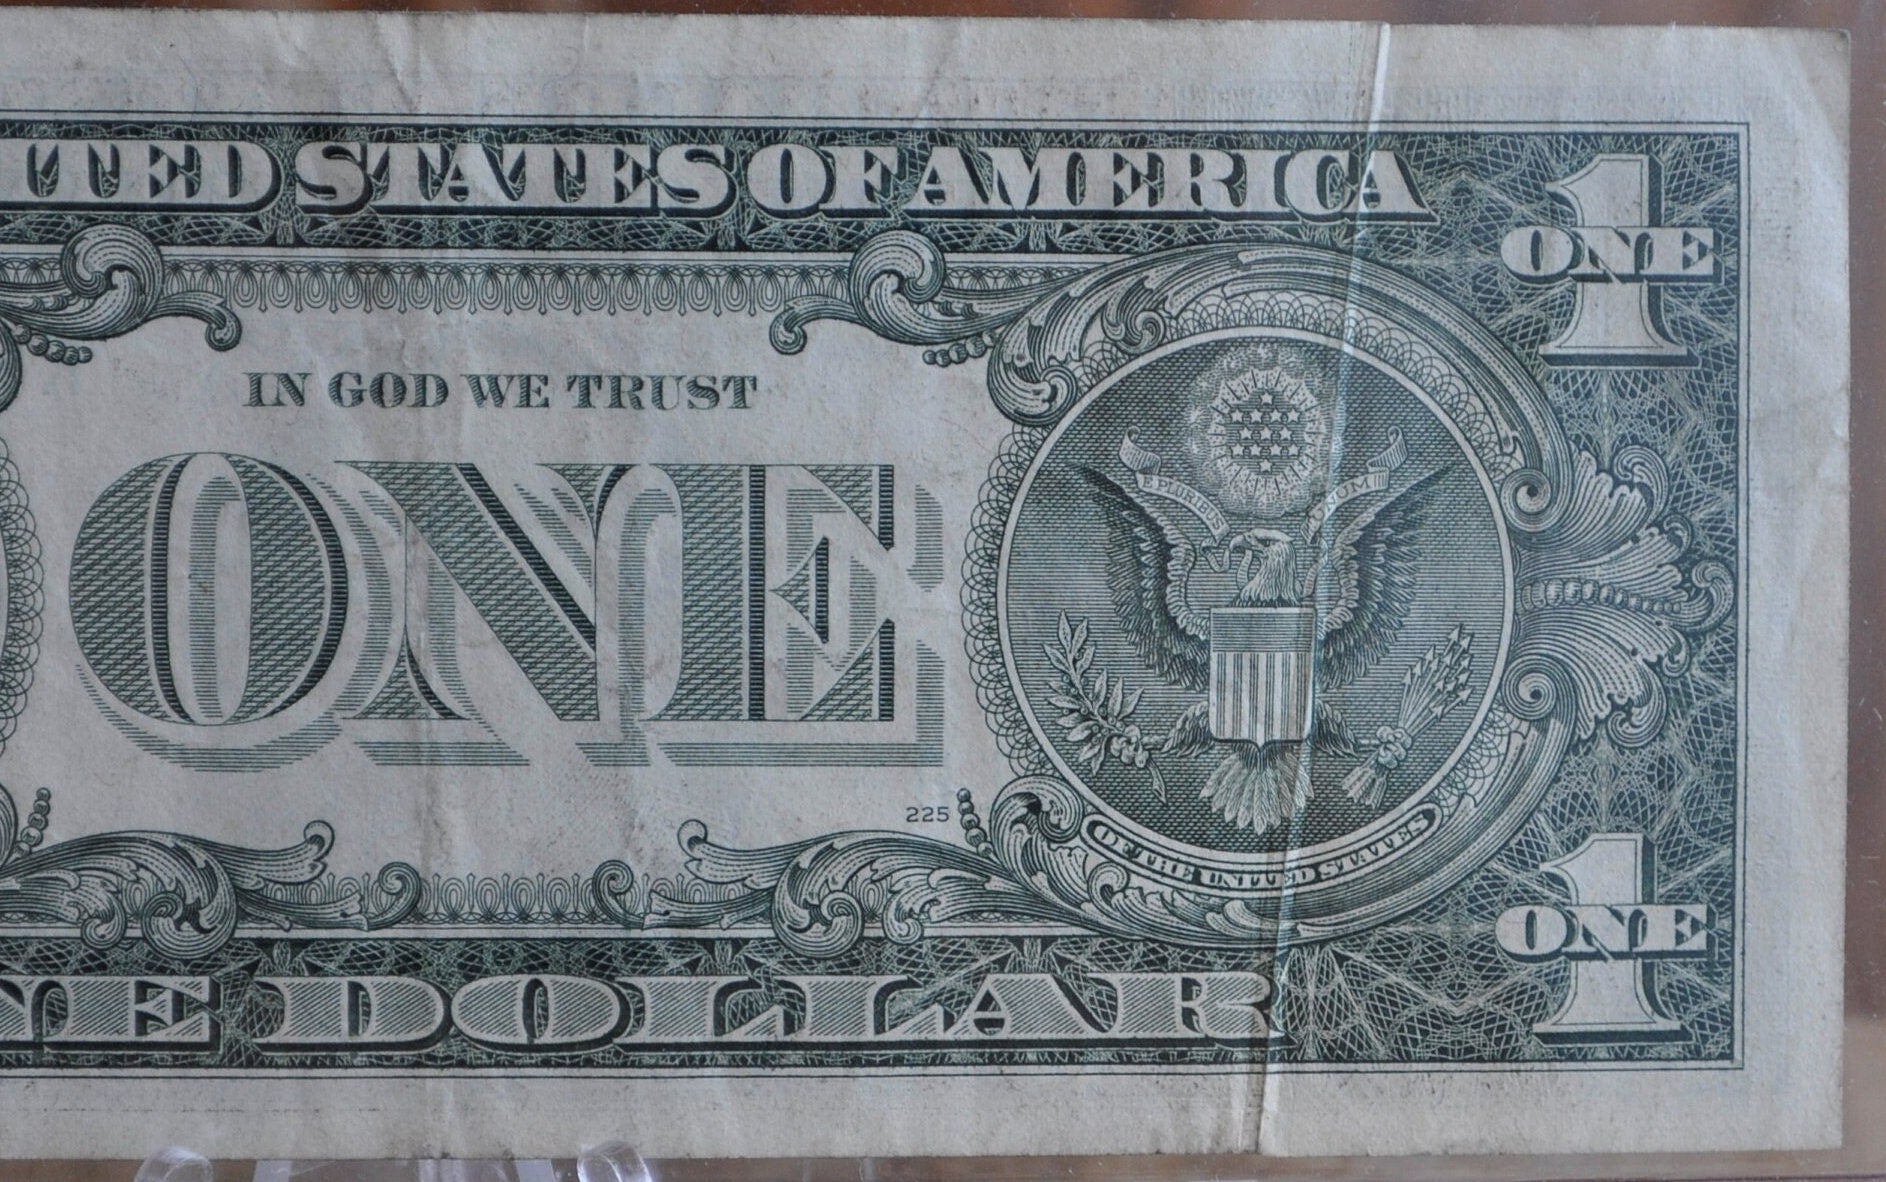 1981 One Dollar Bill Gutter Fold Error - XF (Extremely Fine) Grade - Gutter Fold Error 1 Dollar Bill Federal Reverse Note 1981